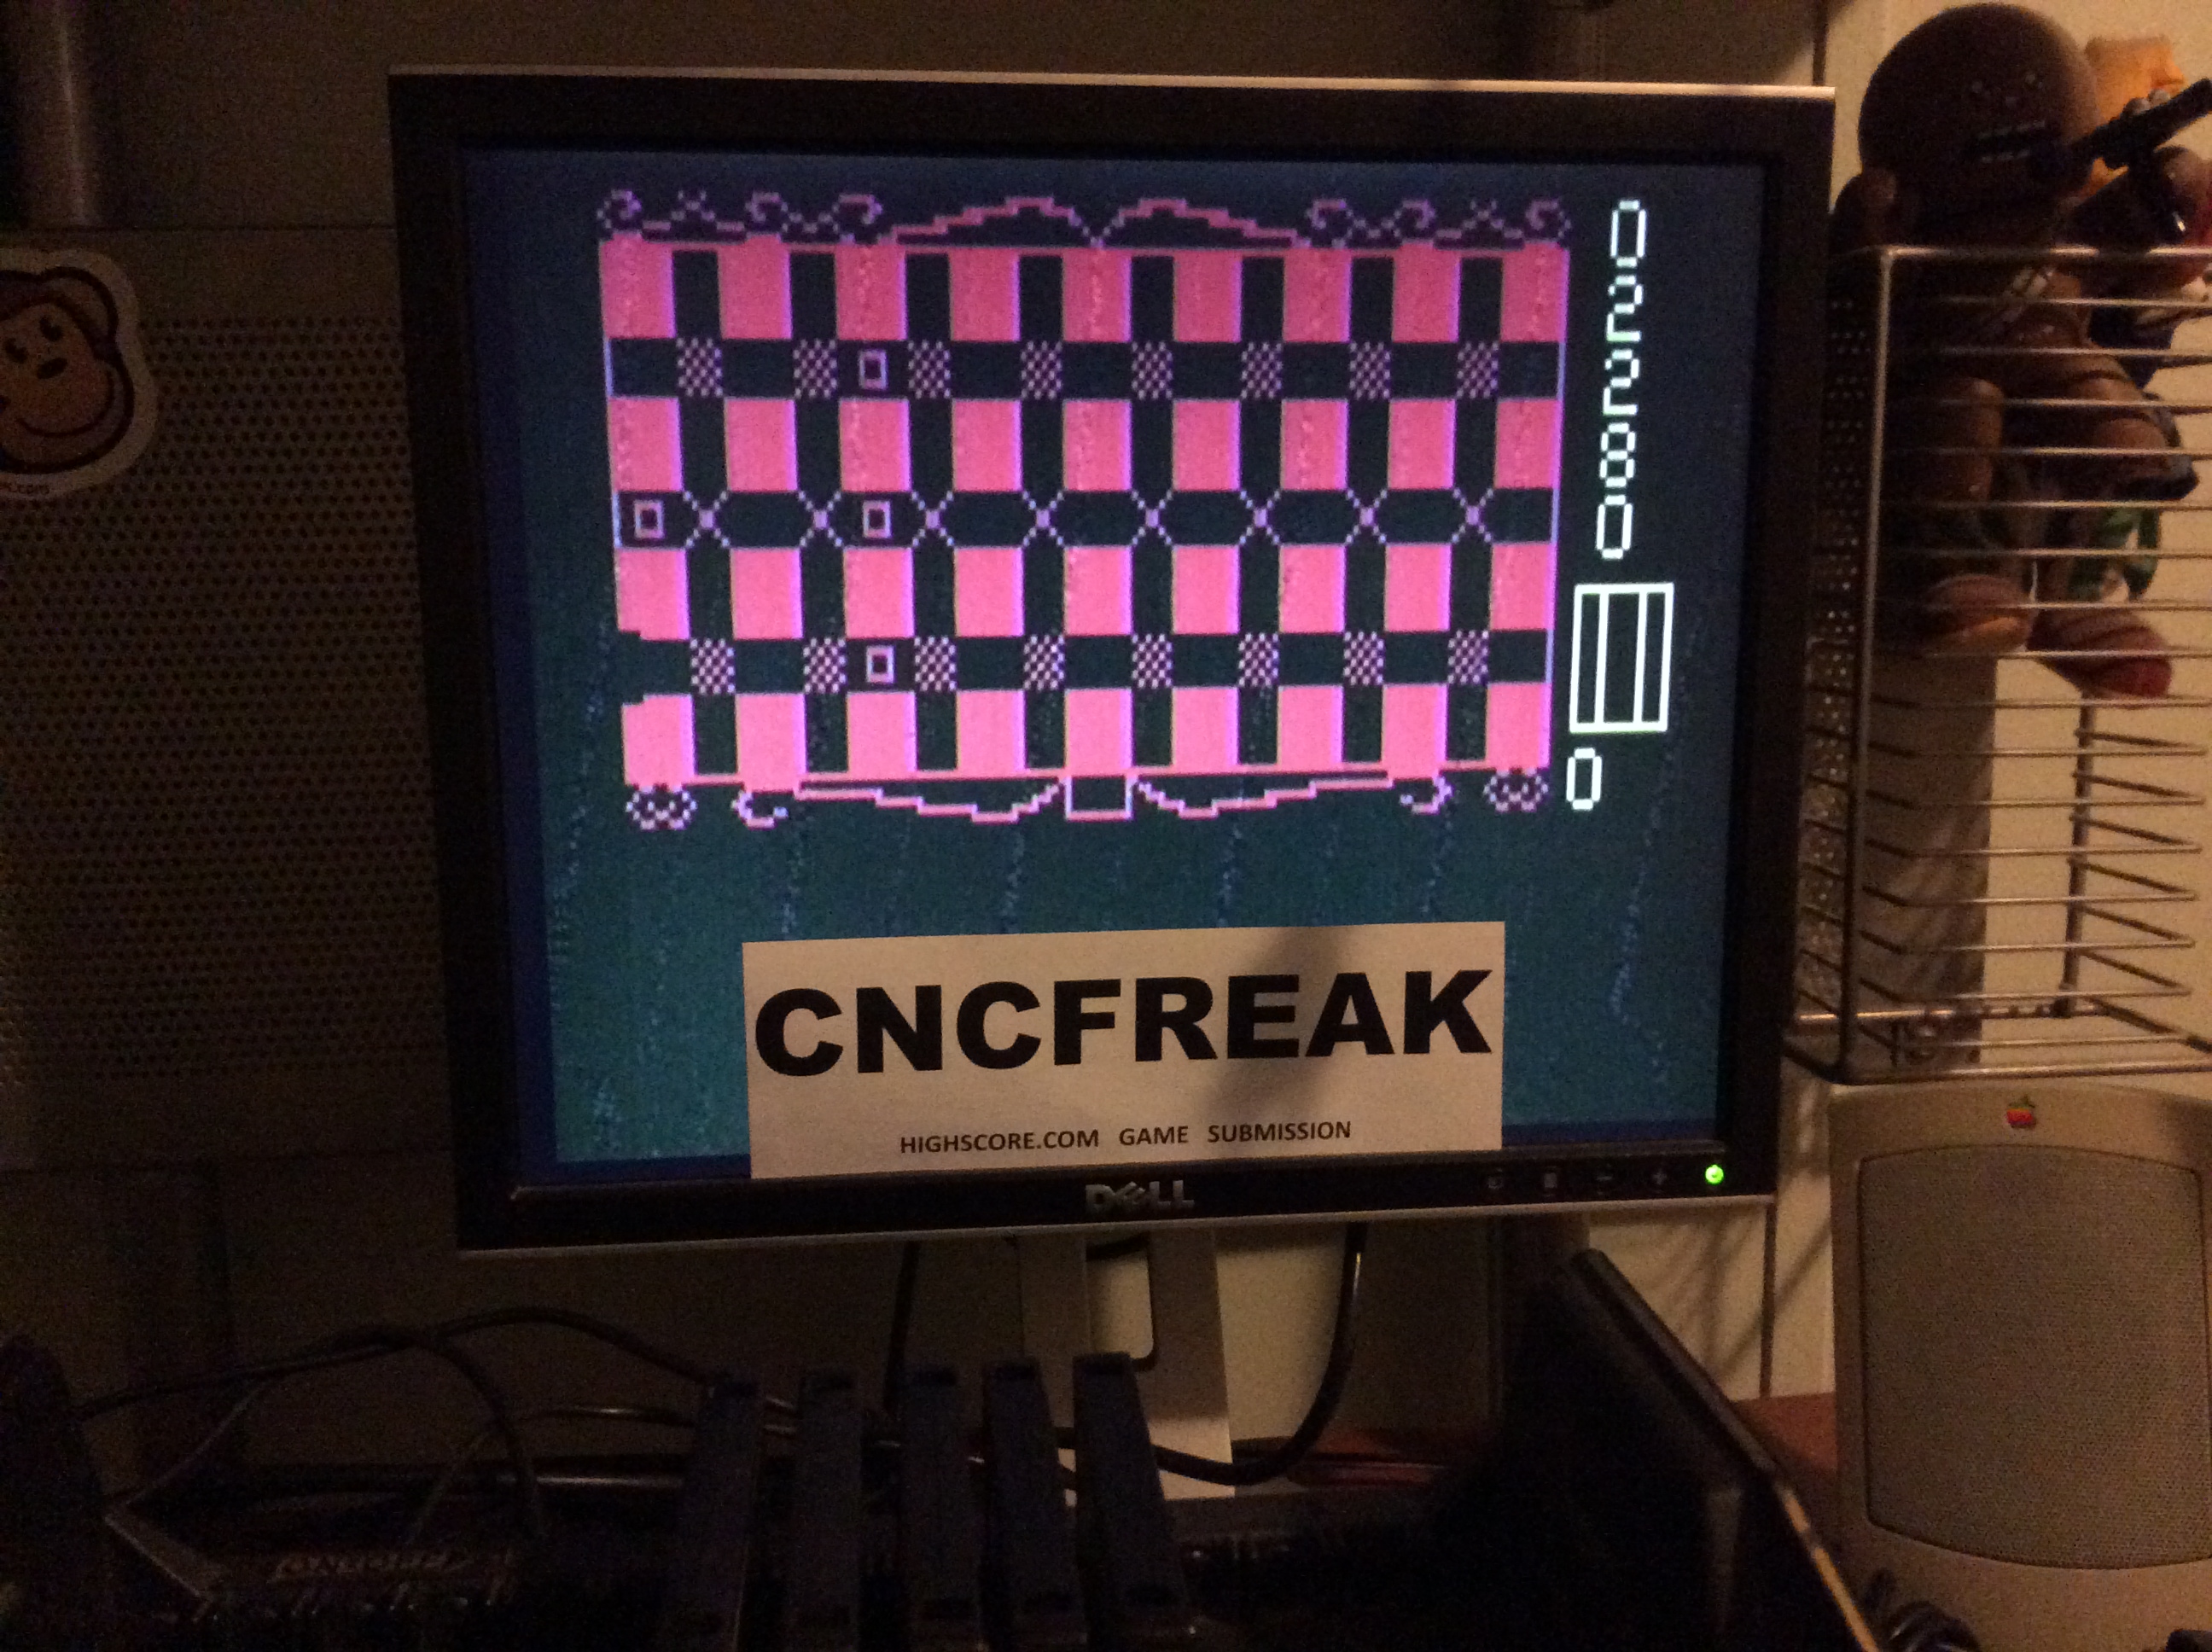 cncfreak: Candy Man (Astrocade) 2,280 points on 2014-04-11 23:04:25